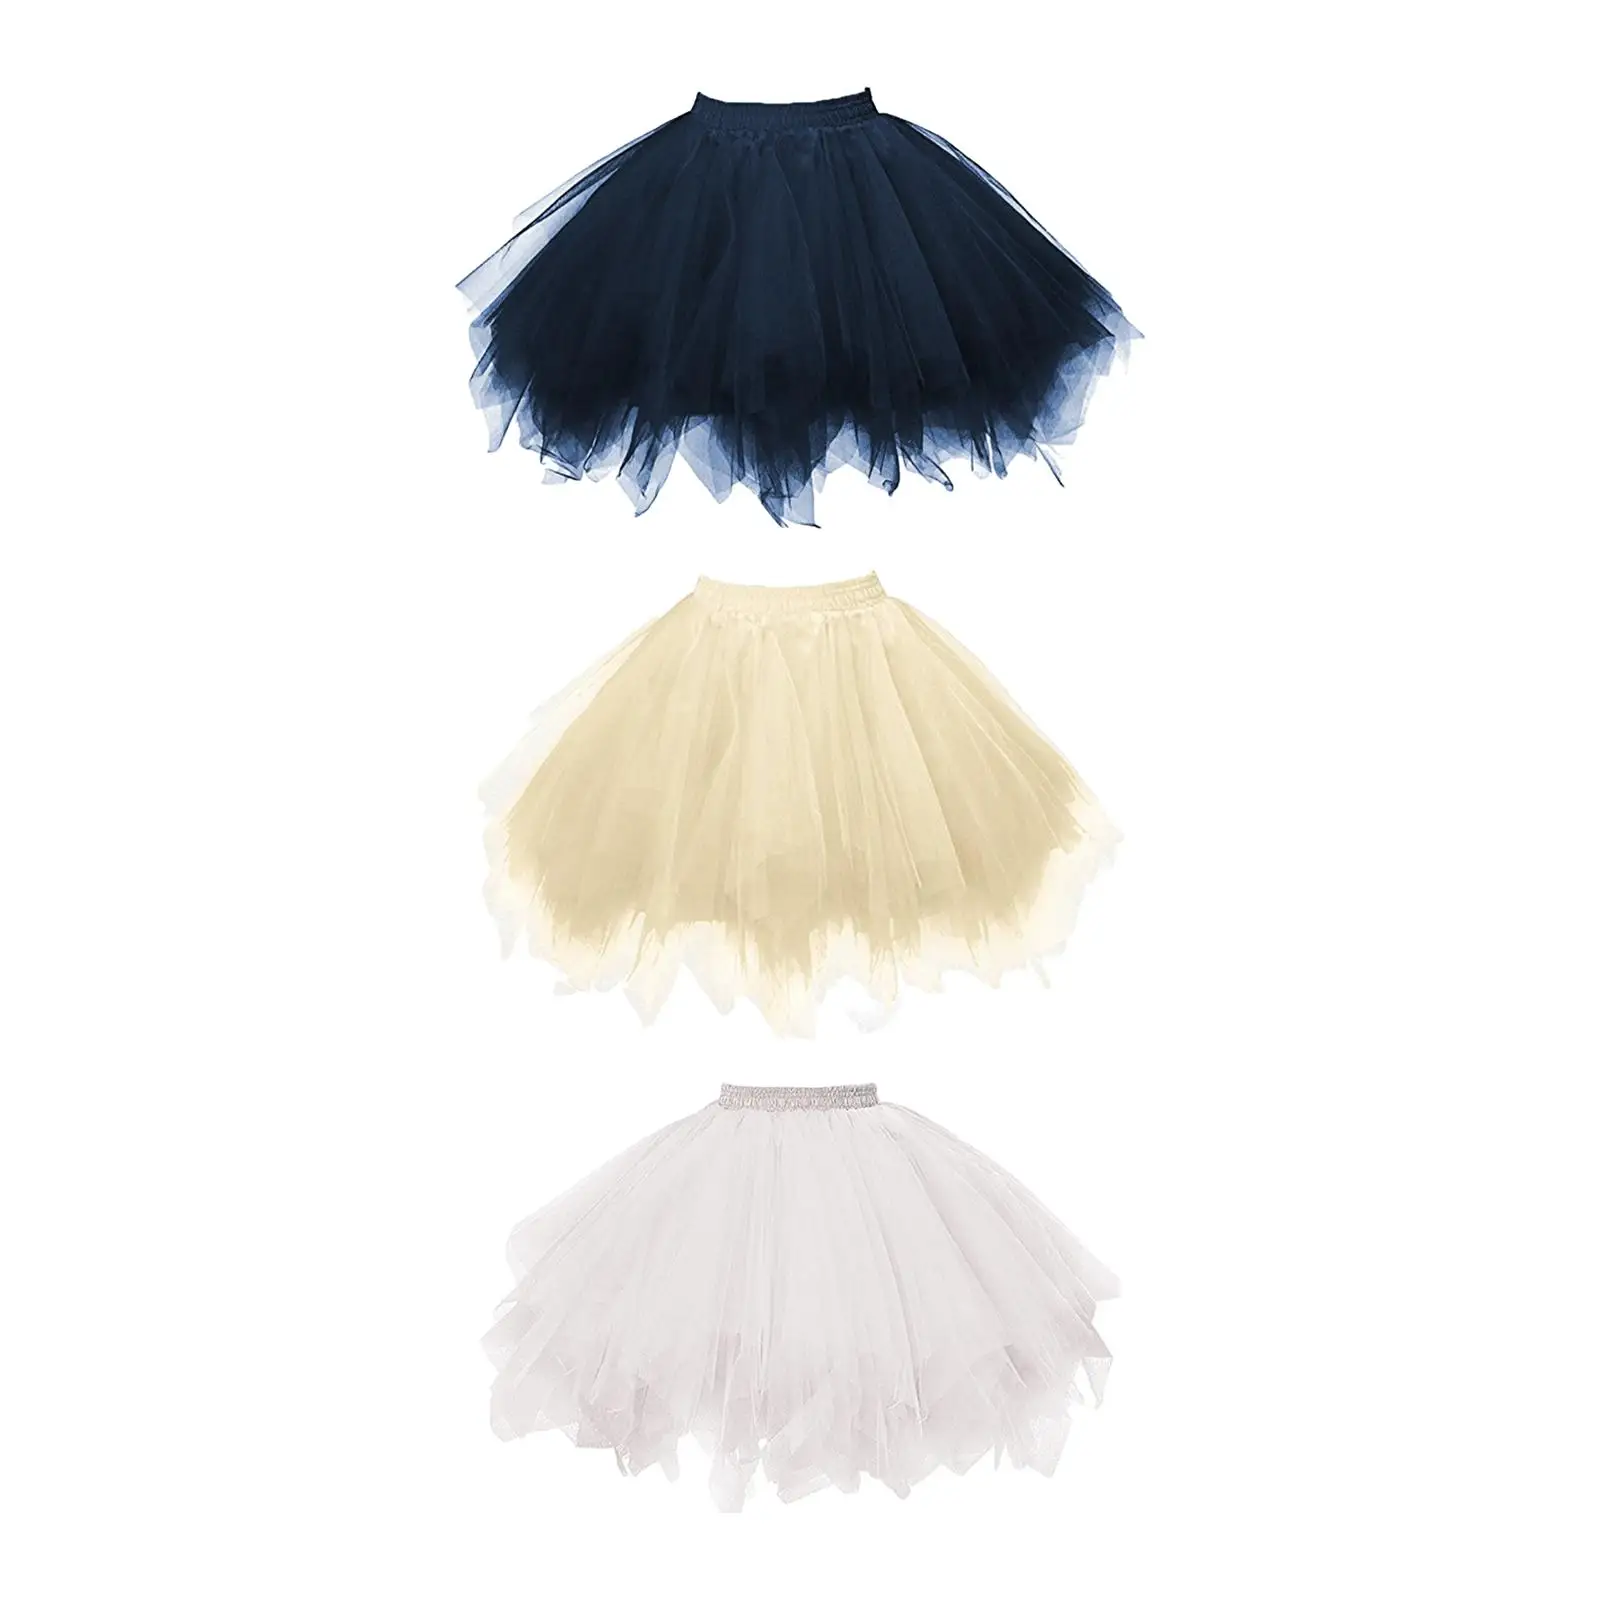 Tulle Petticoat Supplies Party Dress Up Adults Women Tulle Tutu Skirt Dress for Proms Beach Performance Night Club